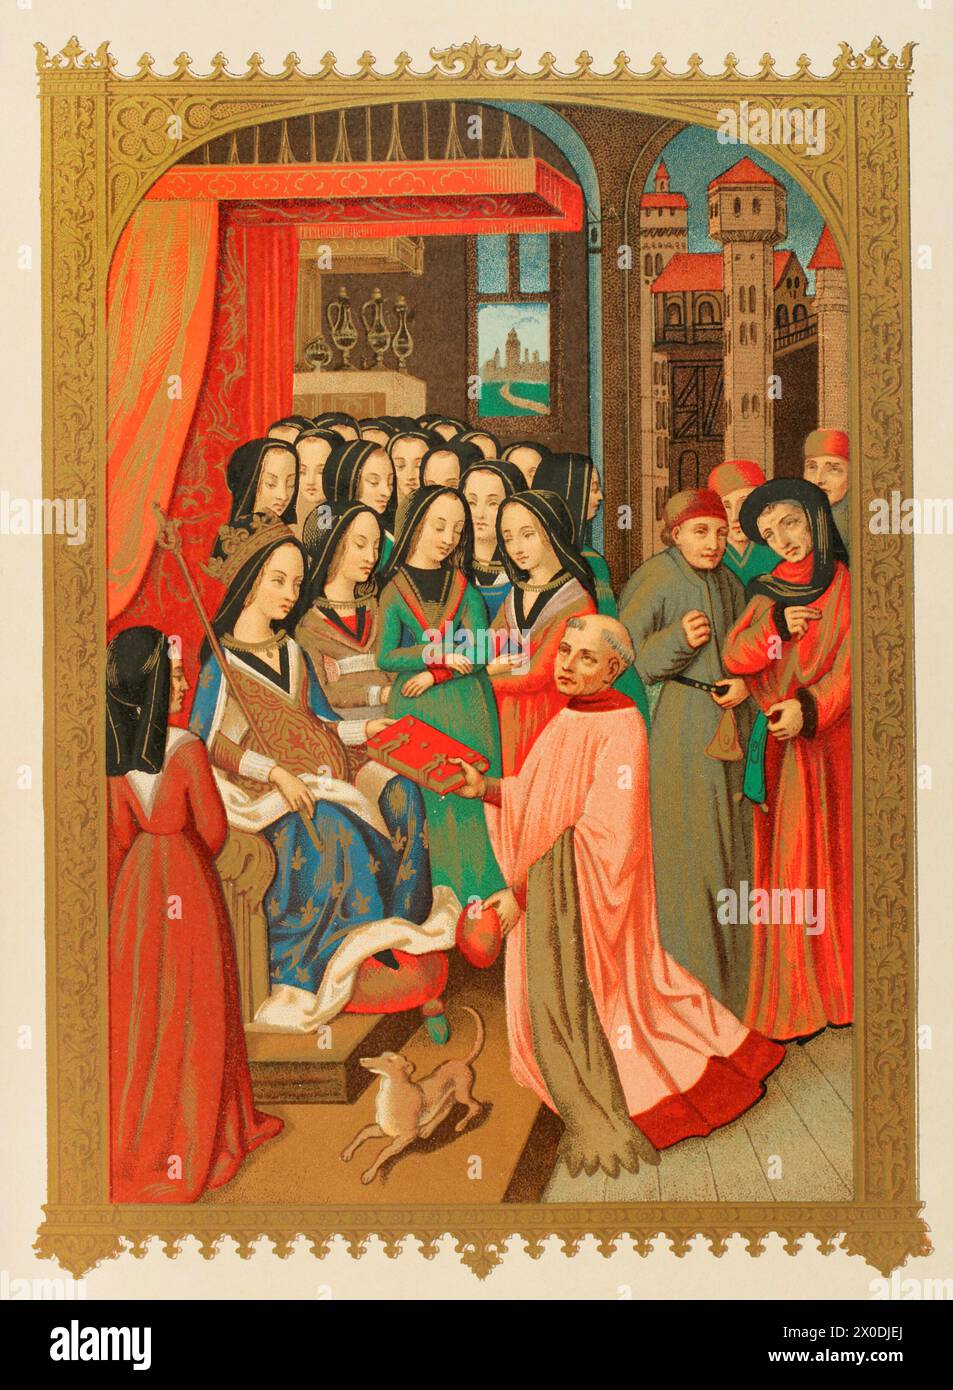 Marie of Anjou (1404-1463). Queen consort of France (1422-1461). The Court of Ladies of Marie of Anjou, wife of Charles VII. His chaplain, the scholar Robert Blondel, presents to her the allegorical treatise of the Twelve Perils of Hell which he composed for her, 1455. Chromolithography from a miniature of that book. 'Moeurs, usages et costumes au moyen-âge et à l'époque de la Renaissance', by Paul Lacroix. Paris, 1878. Stock Photo